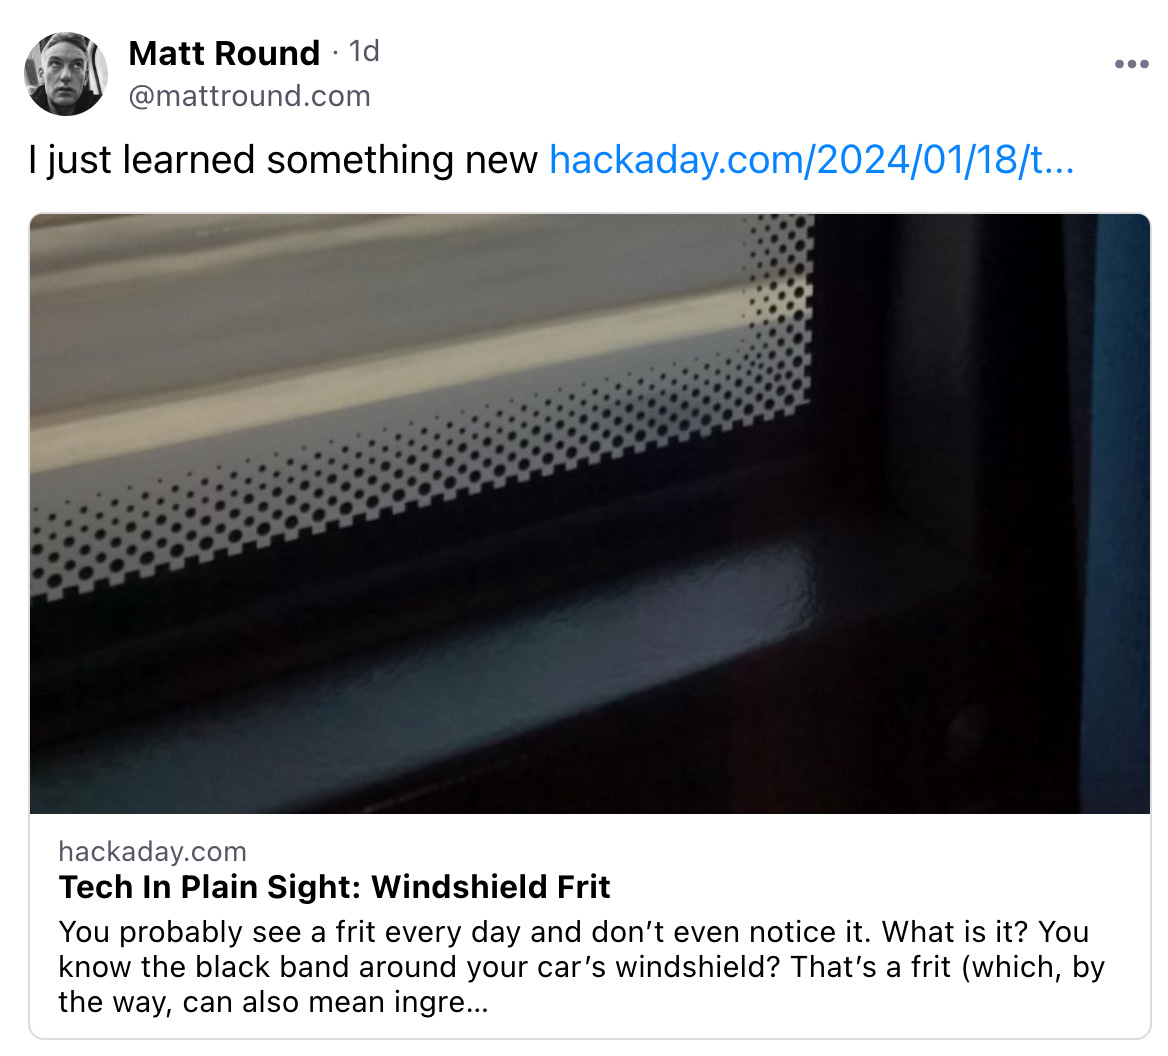  Matt Round · 1d @mattround.com  I just learned something new hackaday.com/2024/01/18/t...  hackaday.com Tech In Plain Sight: Windshield Frit You probably see a frit every day and don’t even notice it. What is it? You know the black band around your car’s windshield? That’s a frit (which, by the way, can also mean ingre…